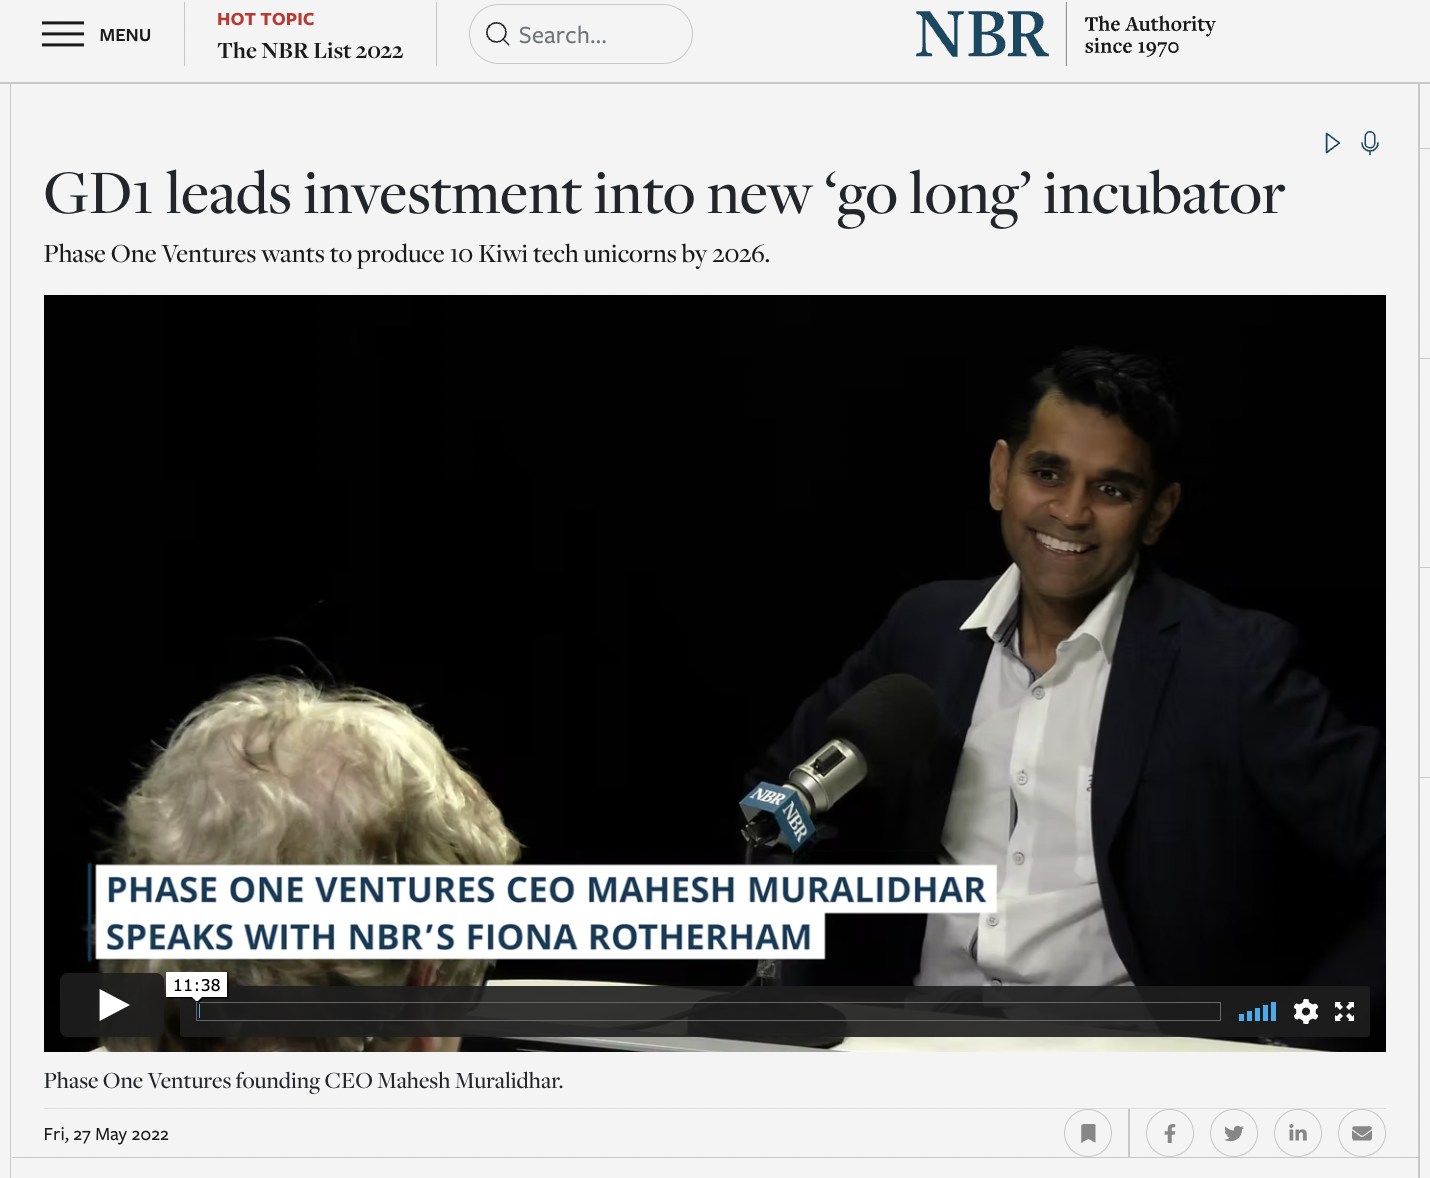 GD1 and Phase One Ventures features in NBR